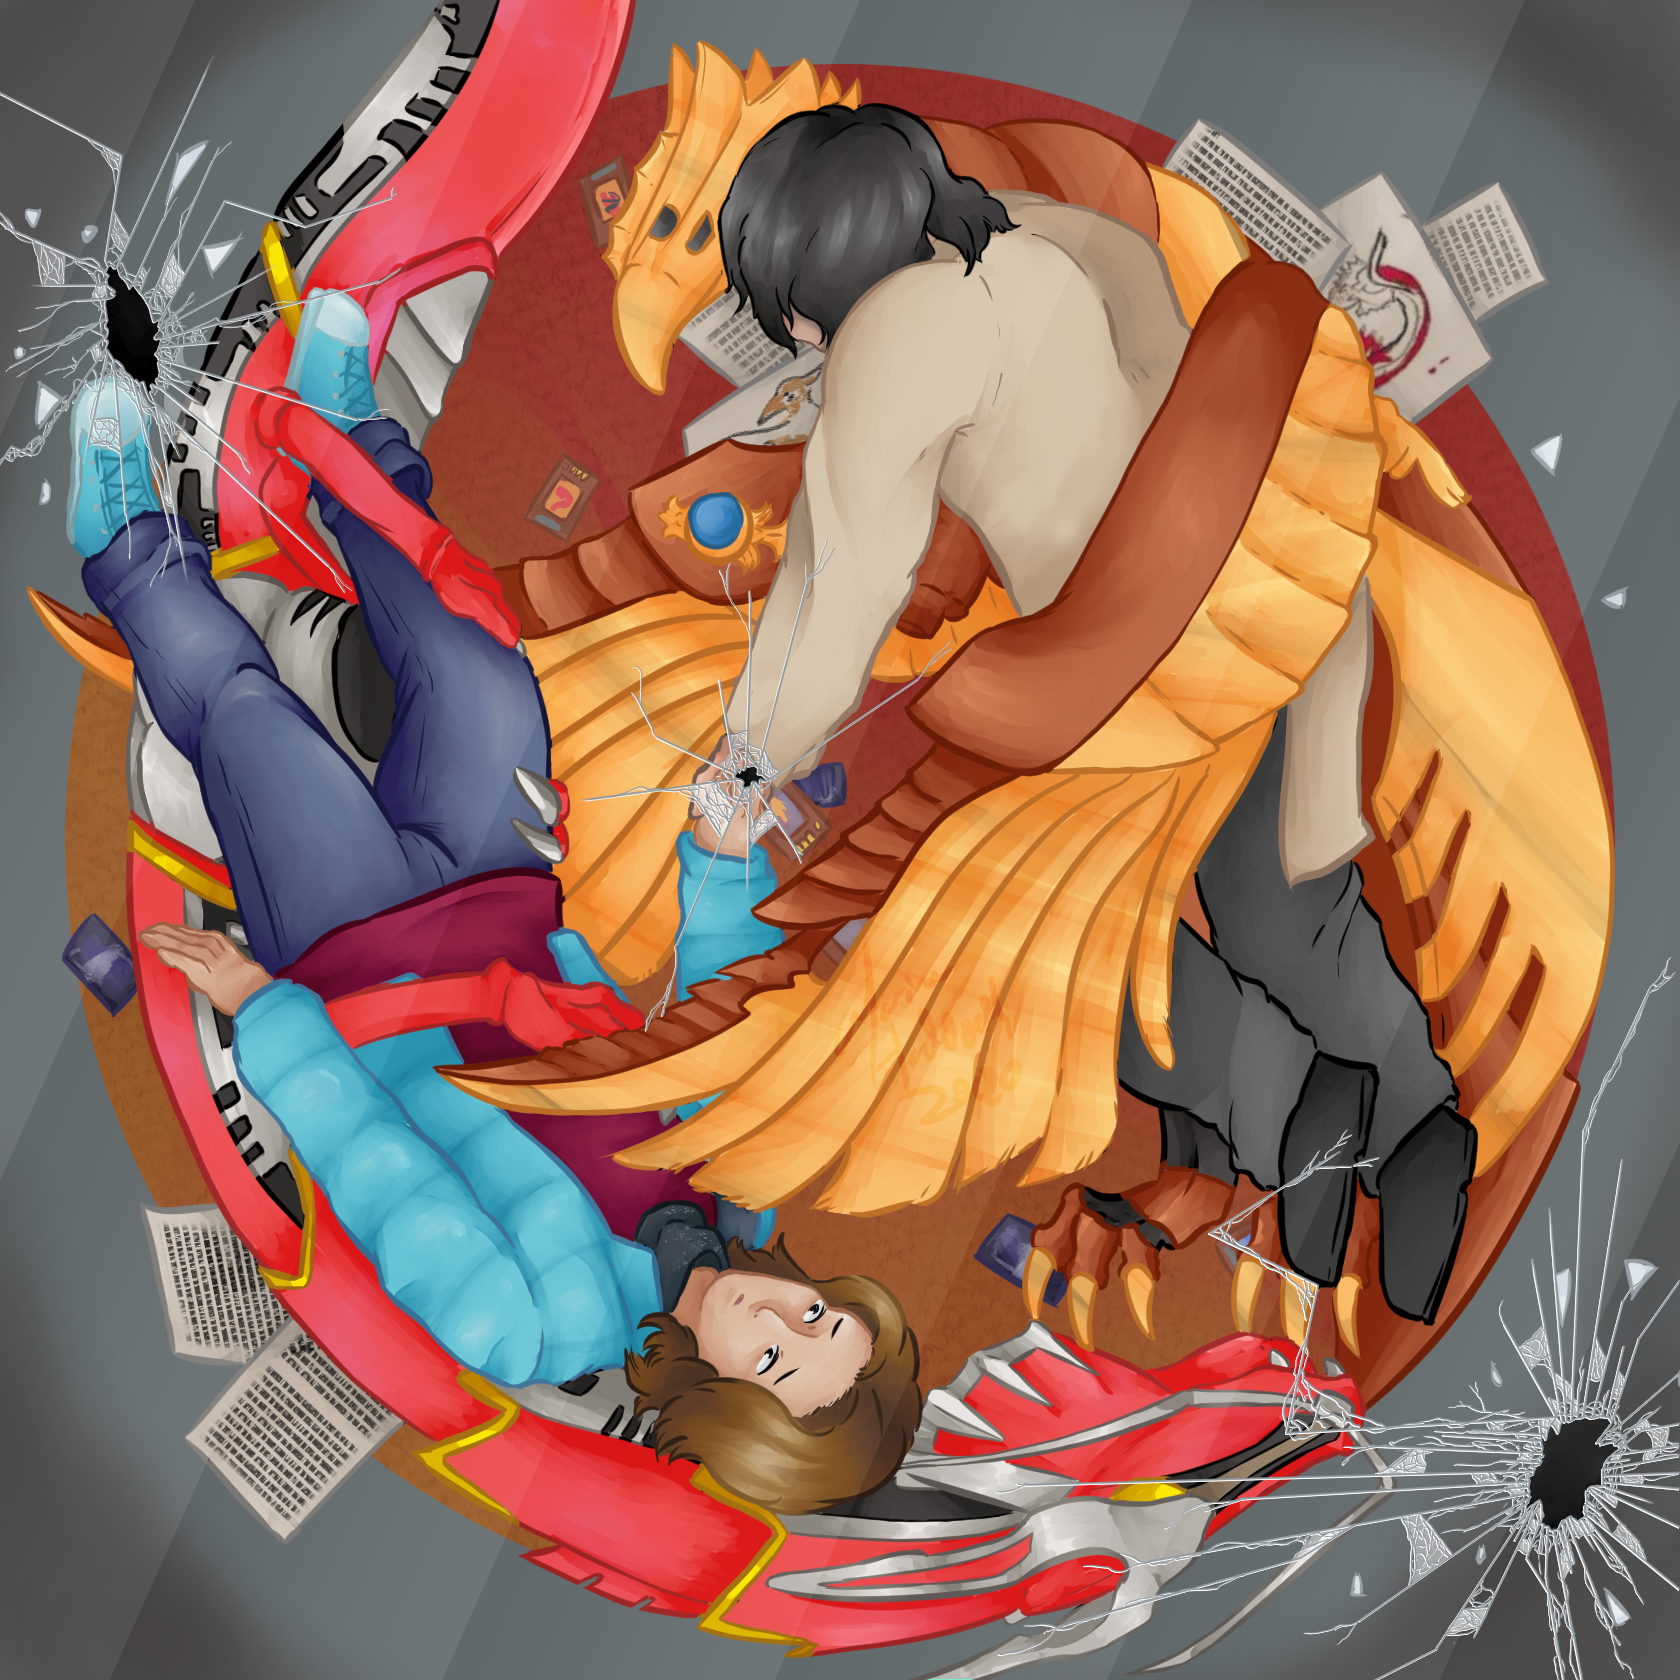 Circular image of Shinji and Shirou from Kamen Rider Ryuki, hands meeting in the middle but glas smashed over where they meet. Shinji is gripped by a lung dragon and Shirou is wrapped in the wings of a phoenix.